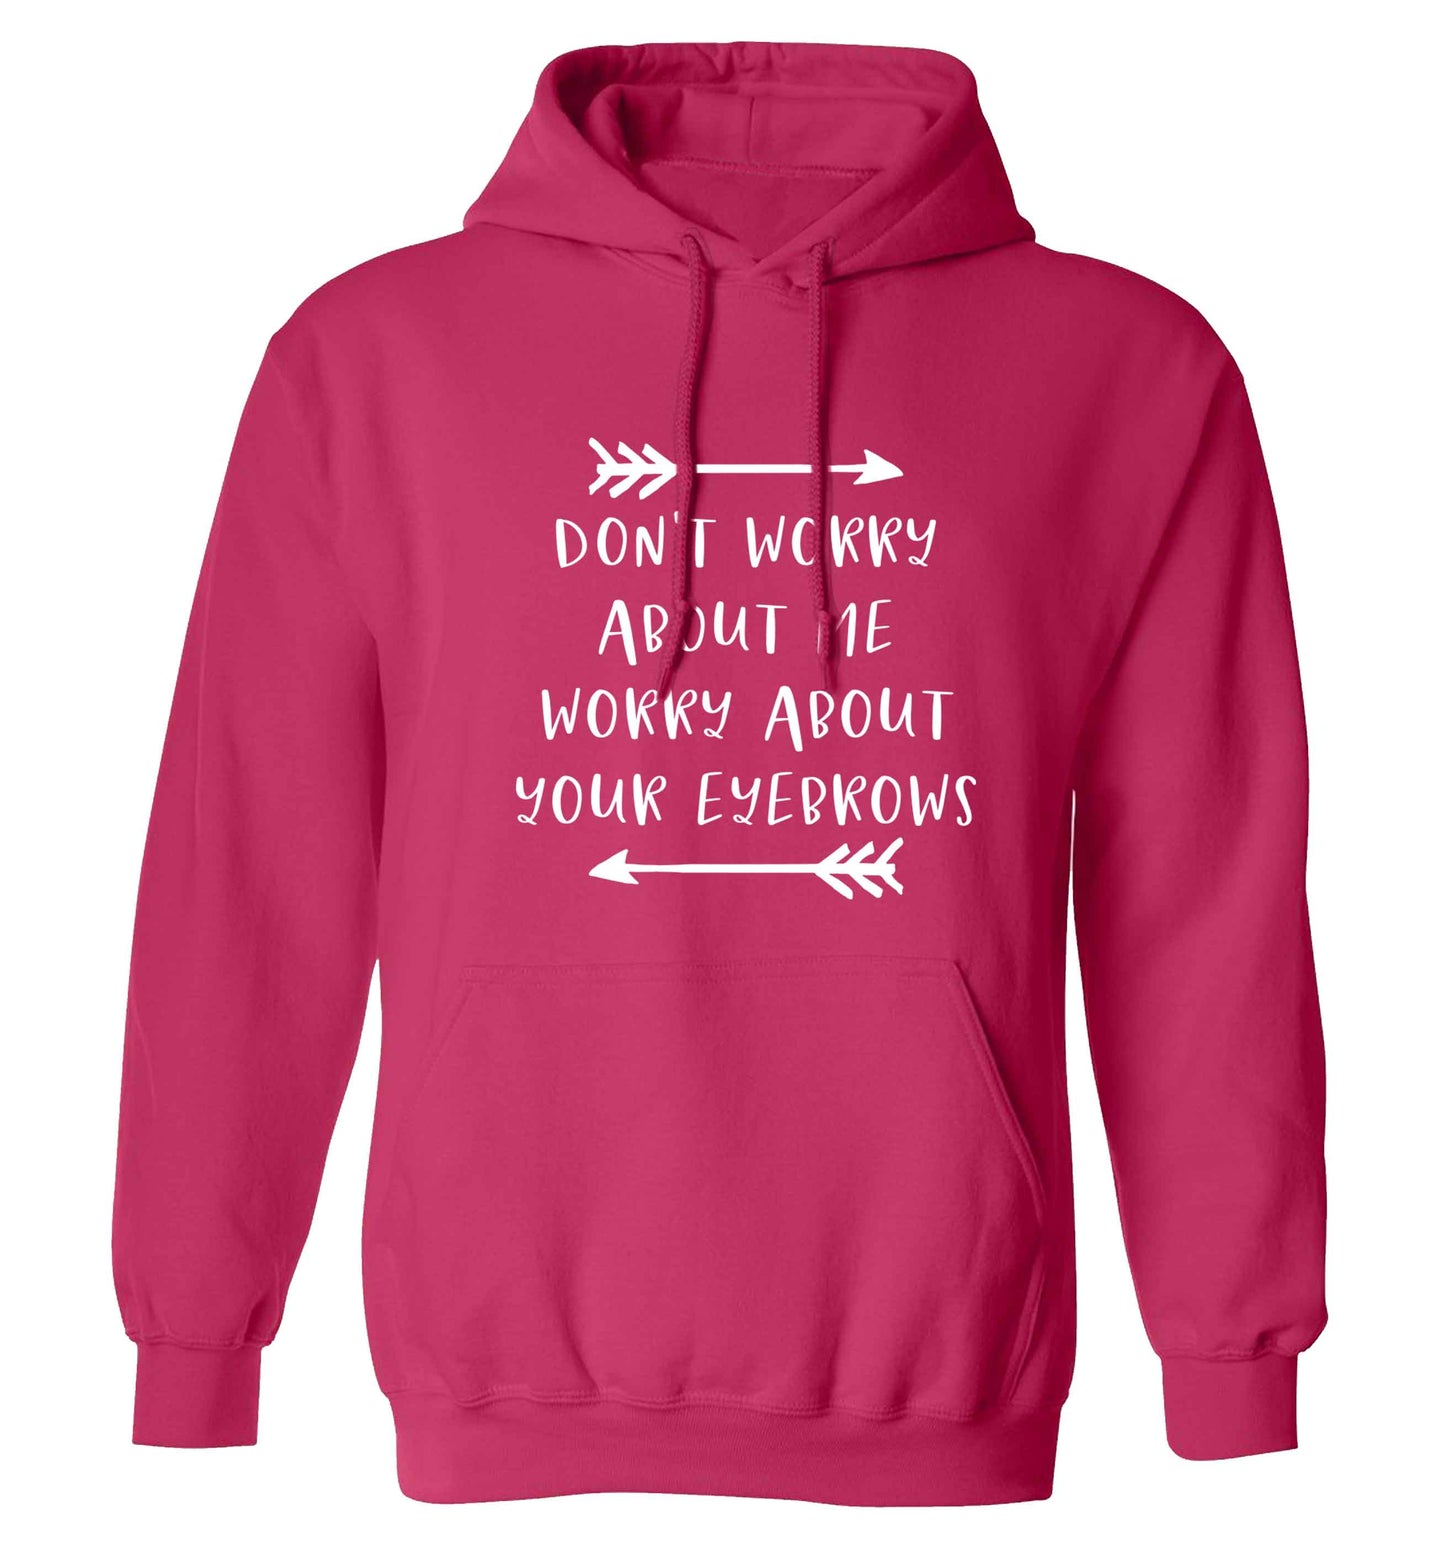 Don't worry about me worry about your eyebrows adults unisex pink hoodie 2XL